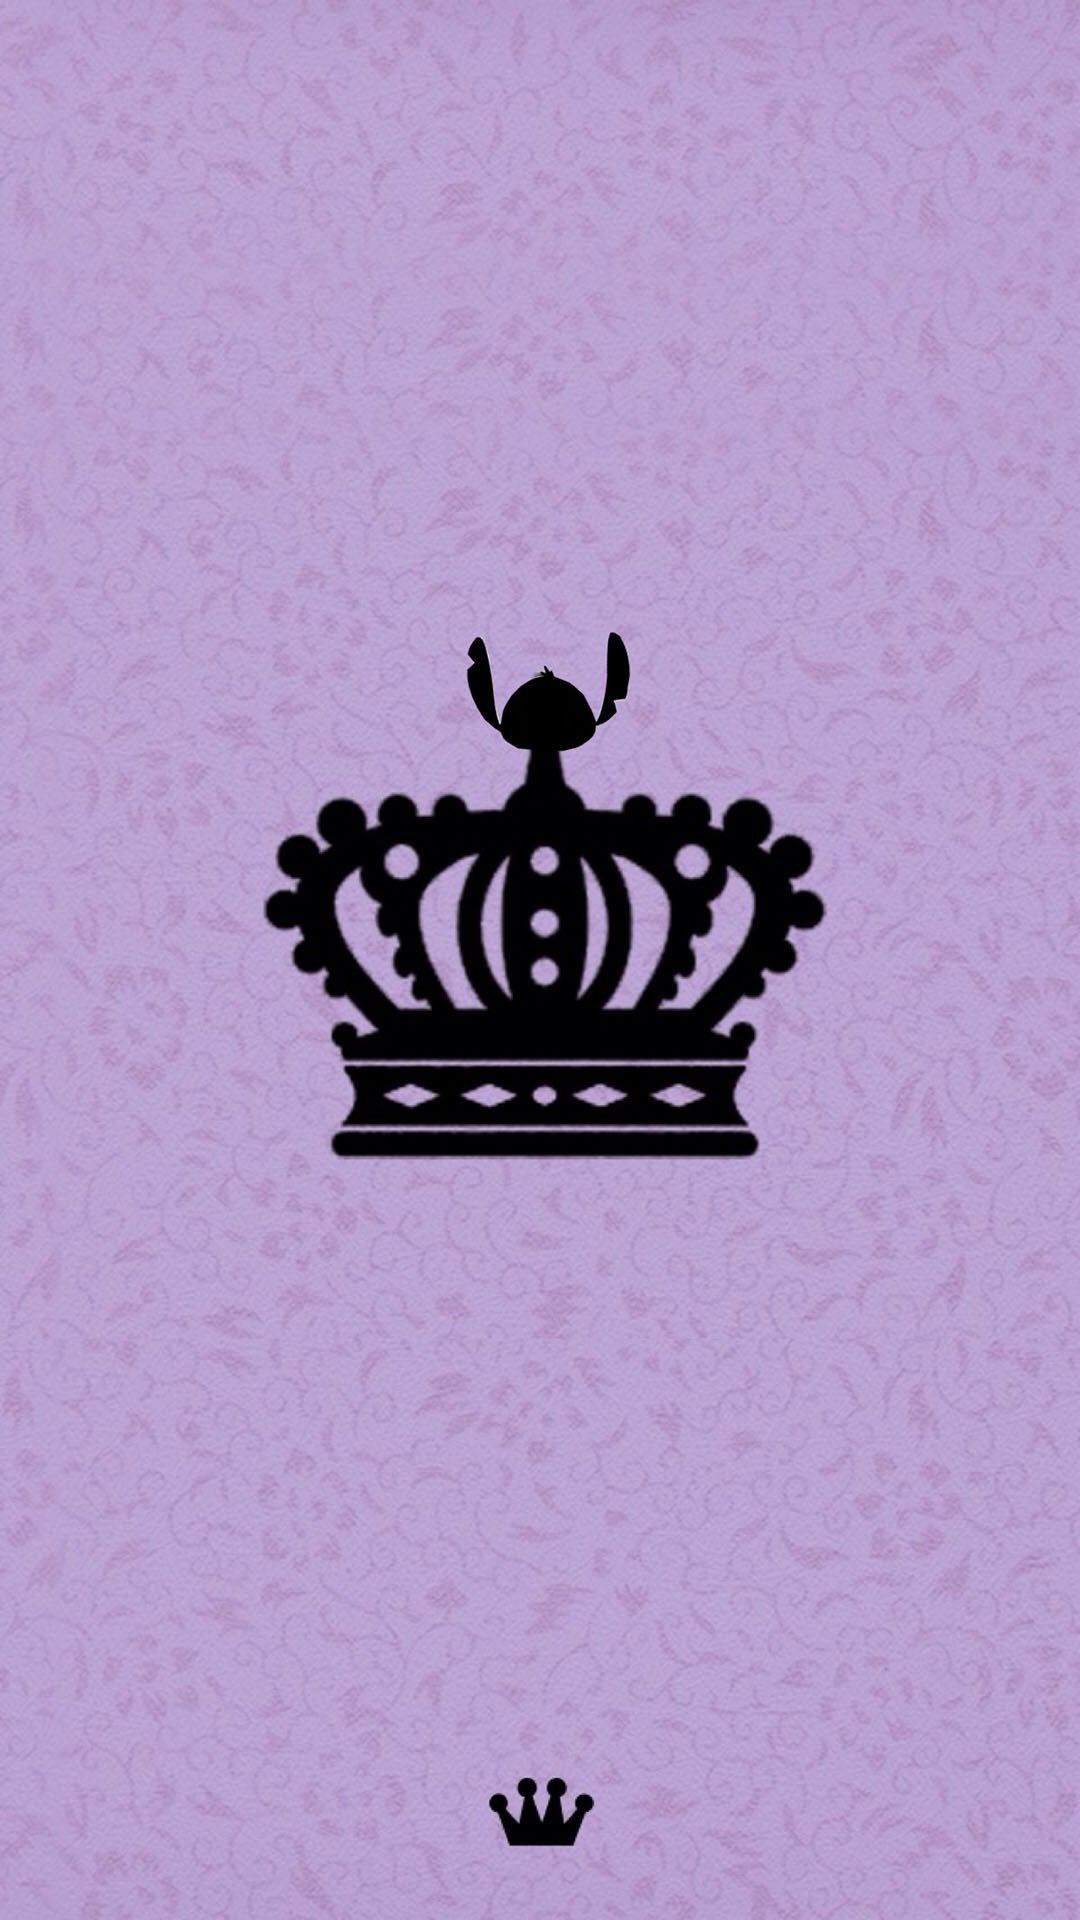 King and Queen Crown Wallpaper